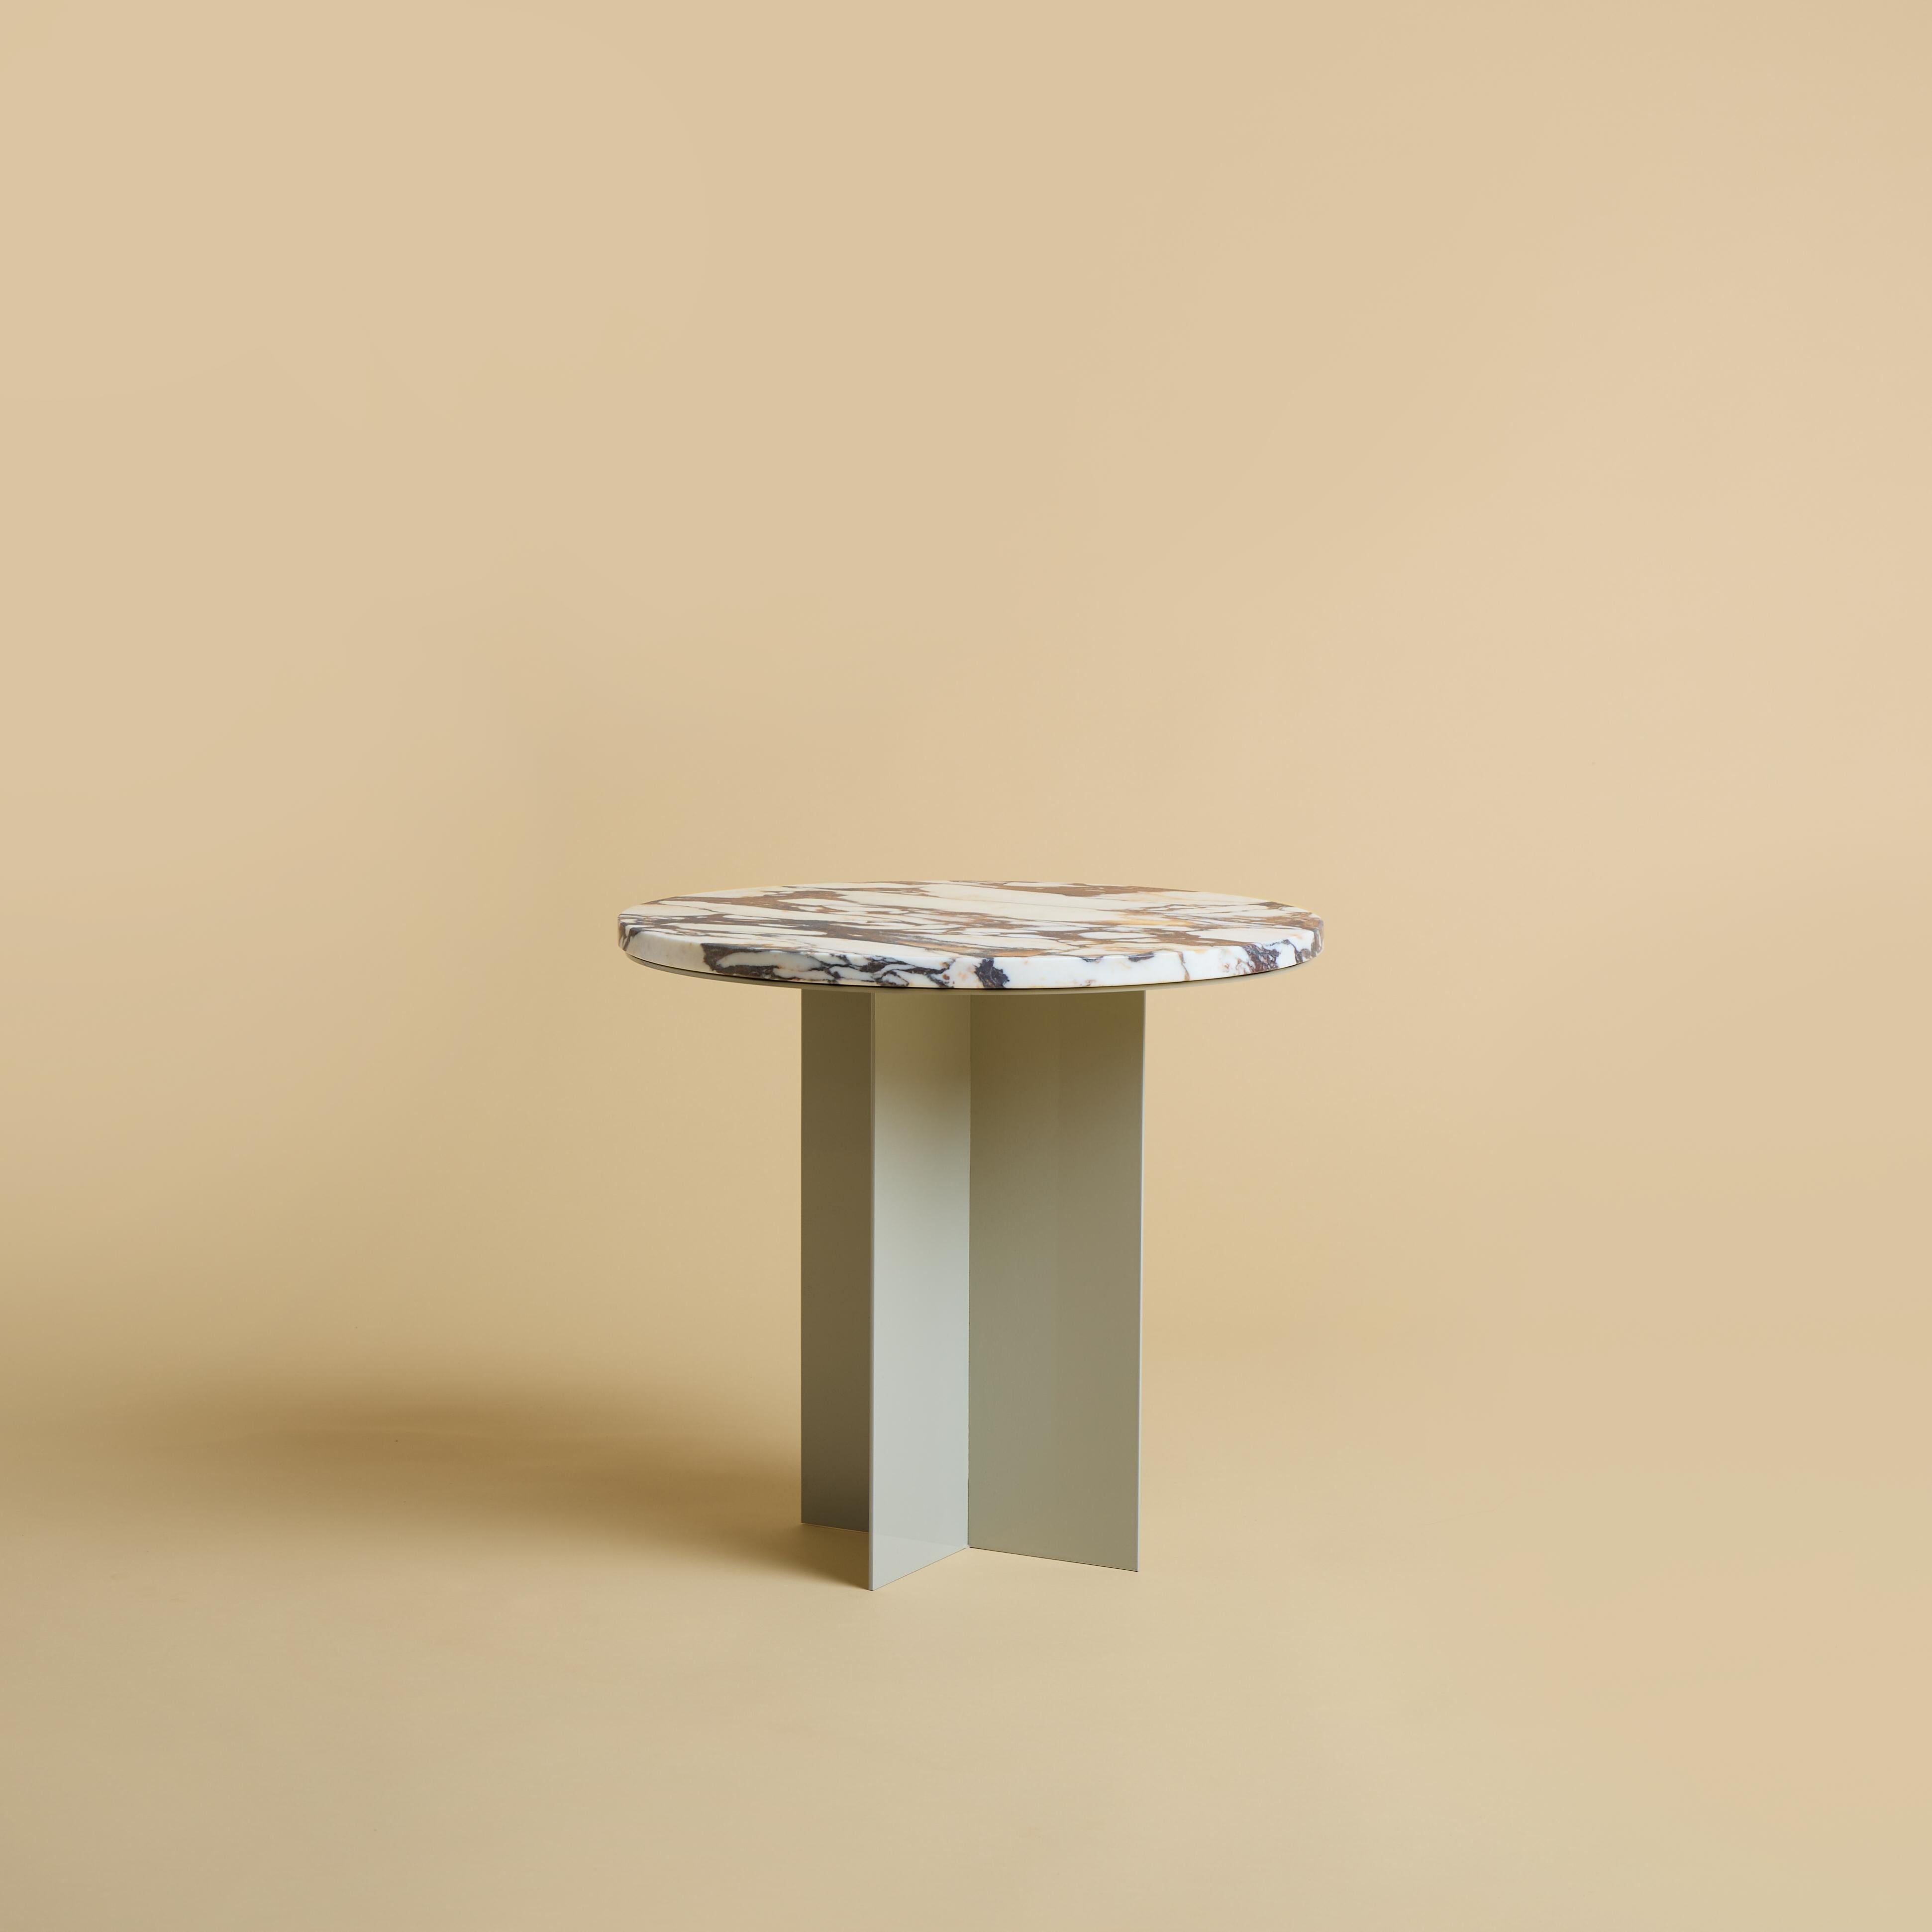 The Baker coffee table is produced with a powder-coated metal base and a top in Calacatta Viola marble from Tuscany region of Italy. The top is circular and has a diameter of 45cm, while the base is obtained by gluing metal plates perpendicular to